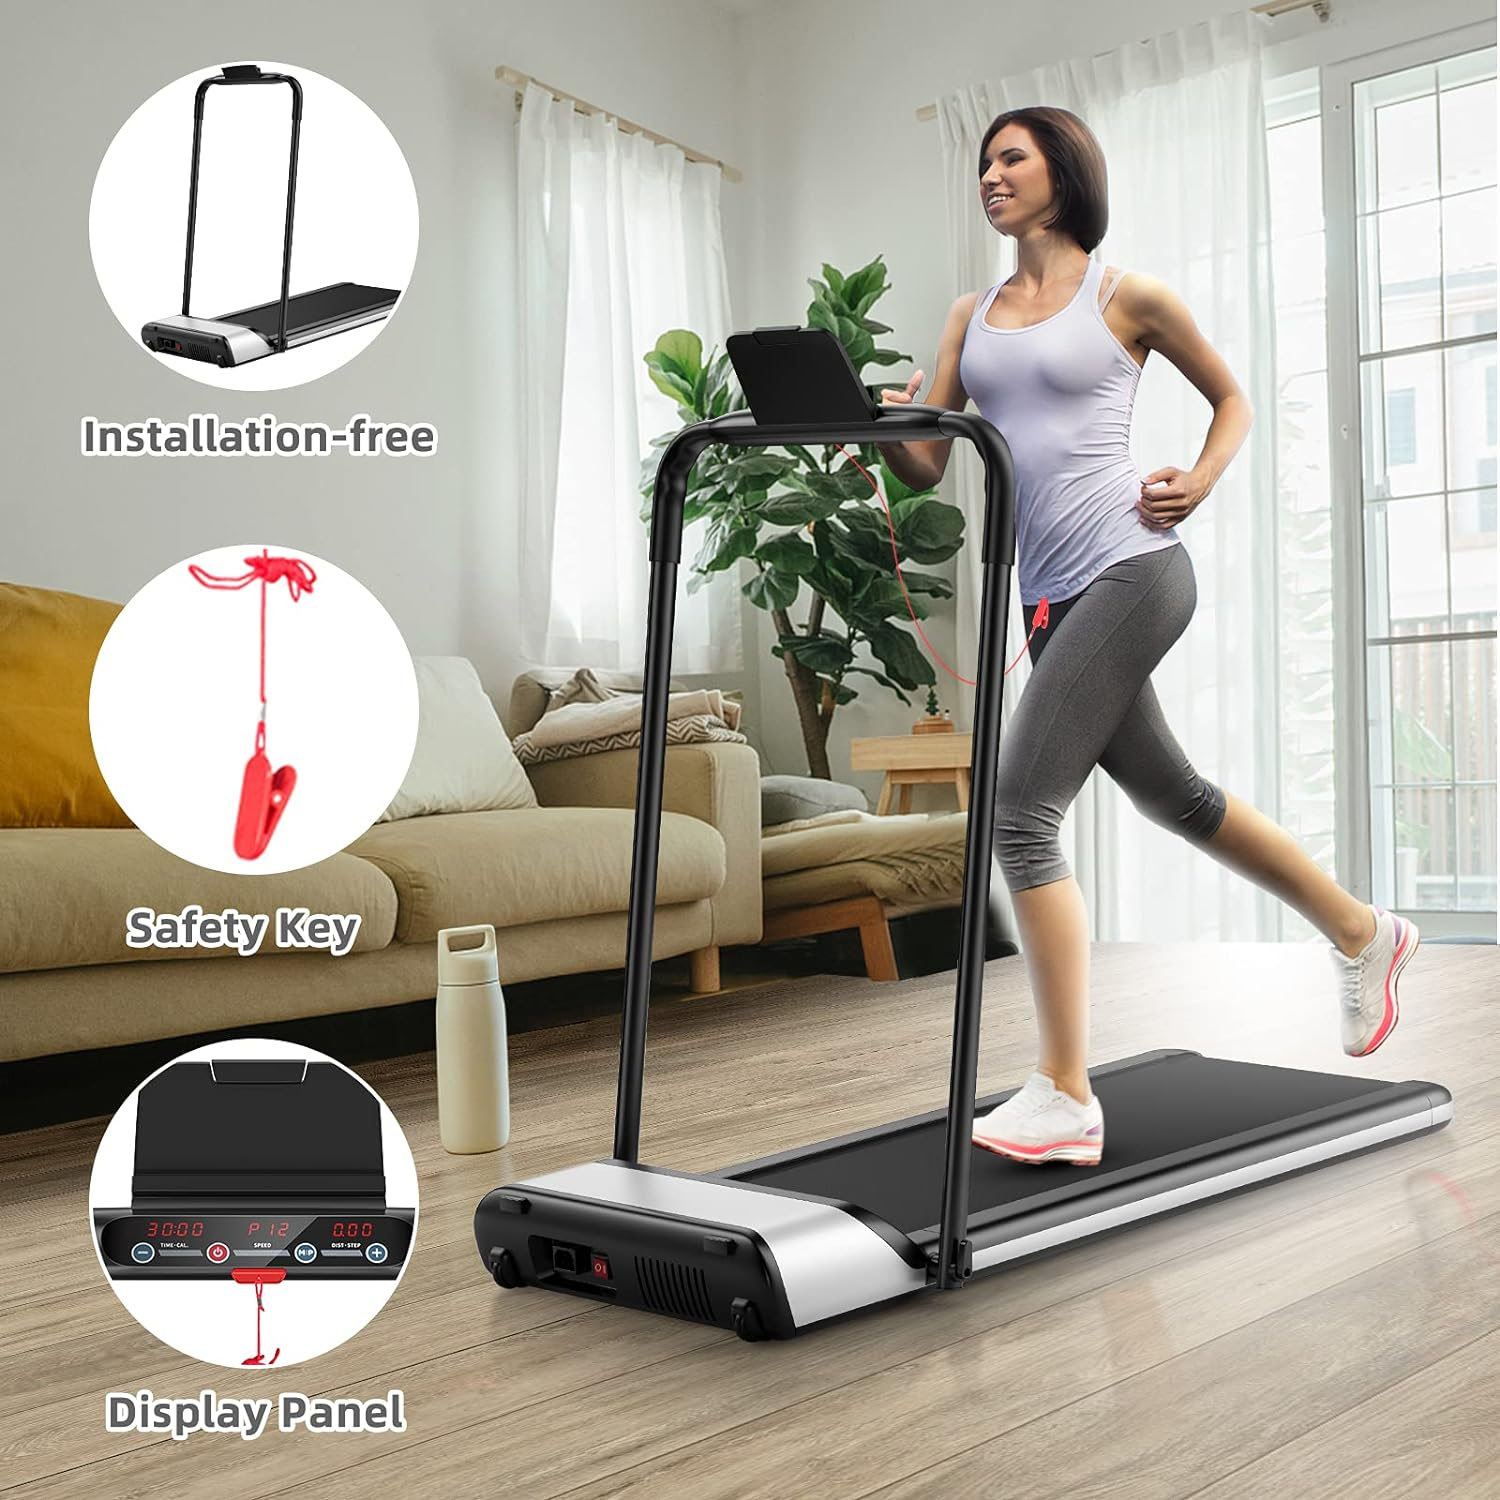 Goplus Folding Treadmill, Ultra-Thin Installation-Free Foldable Electric Treadmill, Low Noise, Walking Jogging Machine, Portable Superfit Treadmills for Home Office